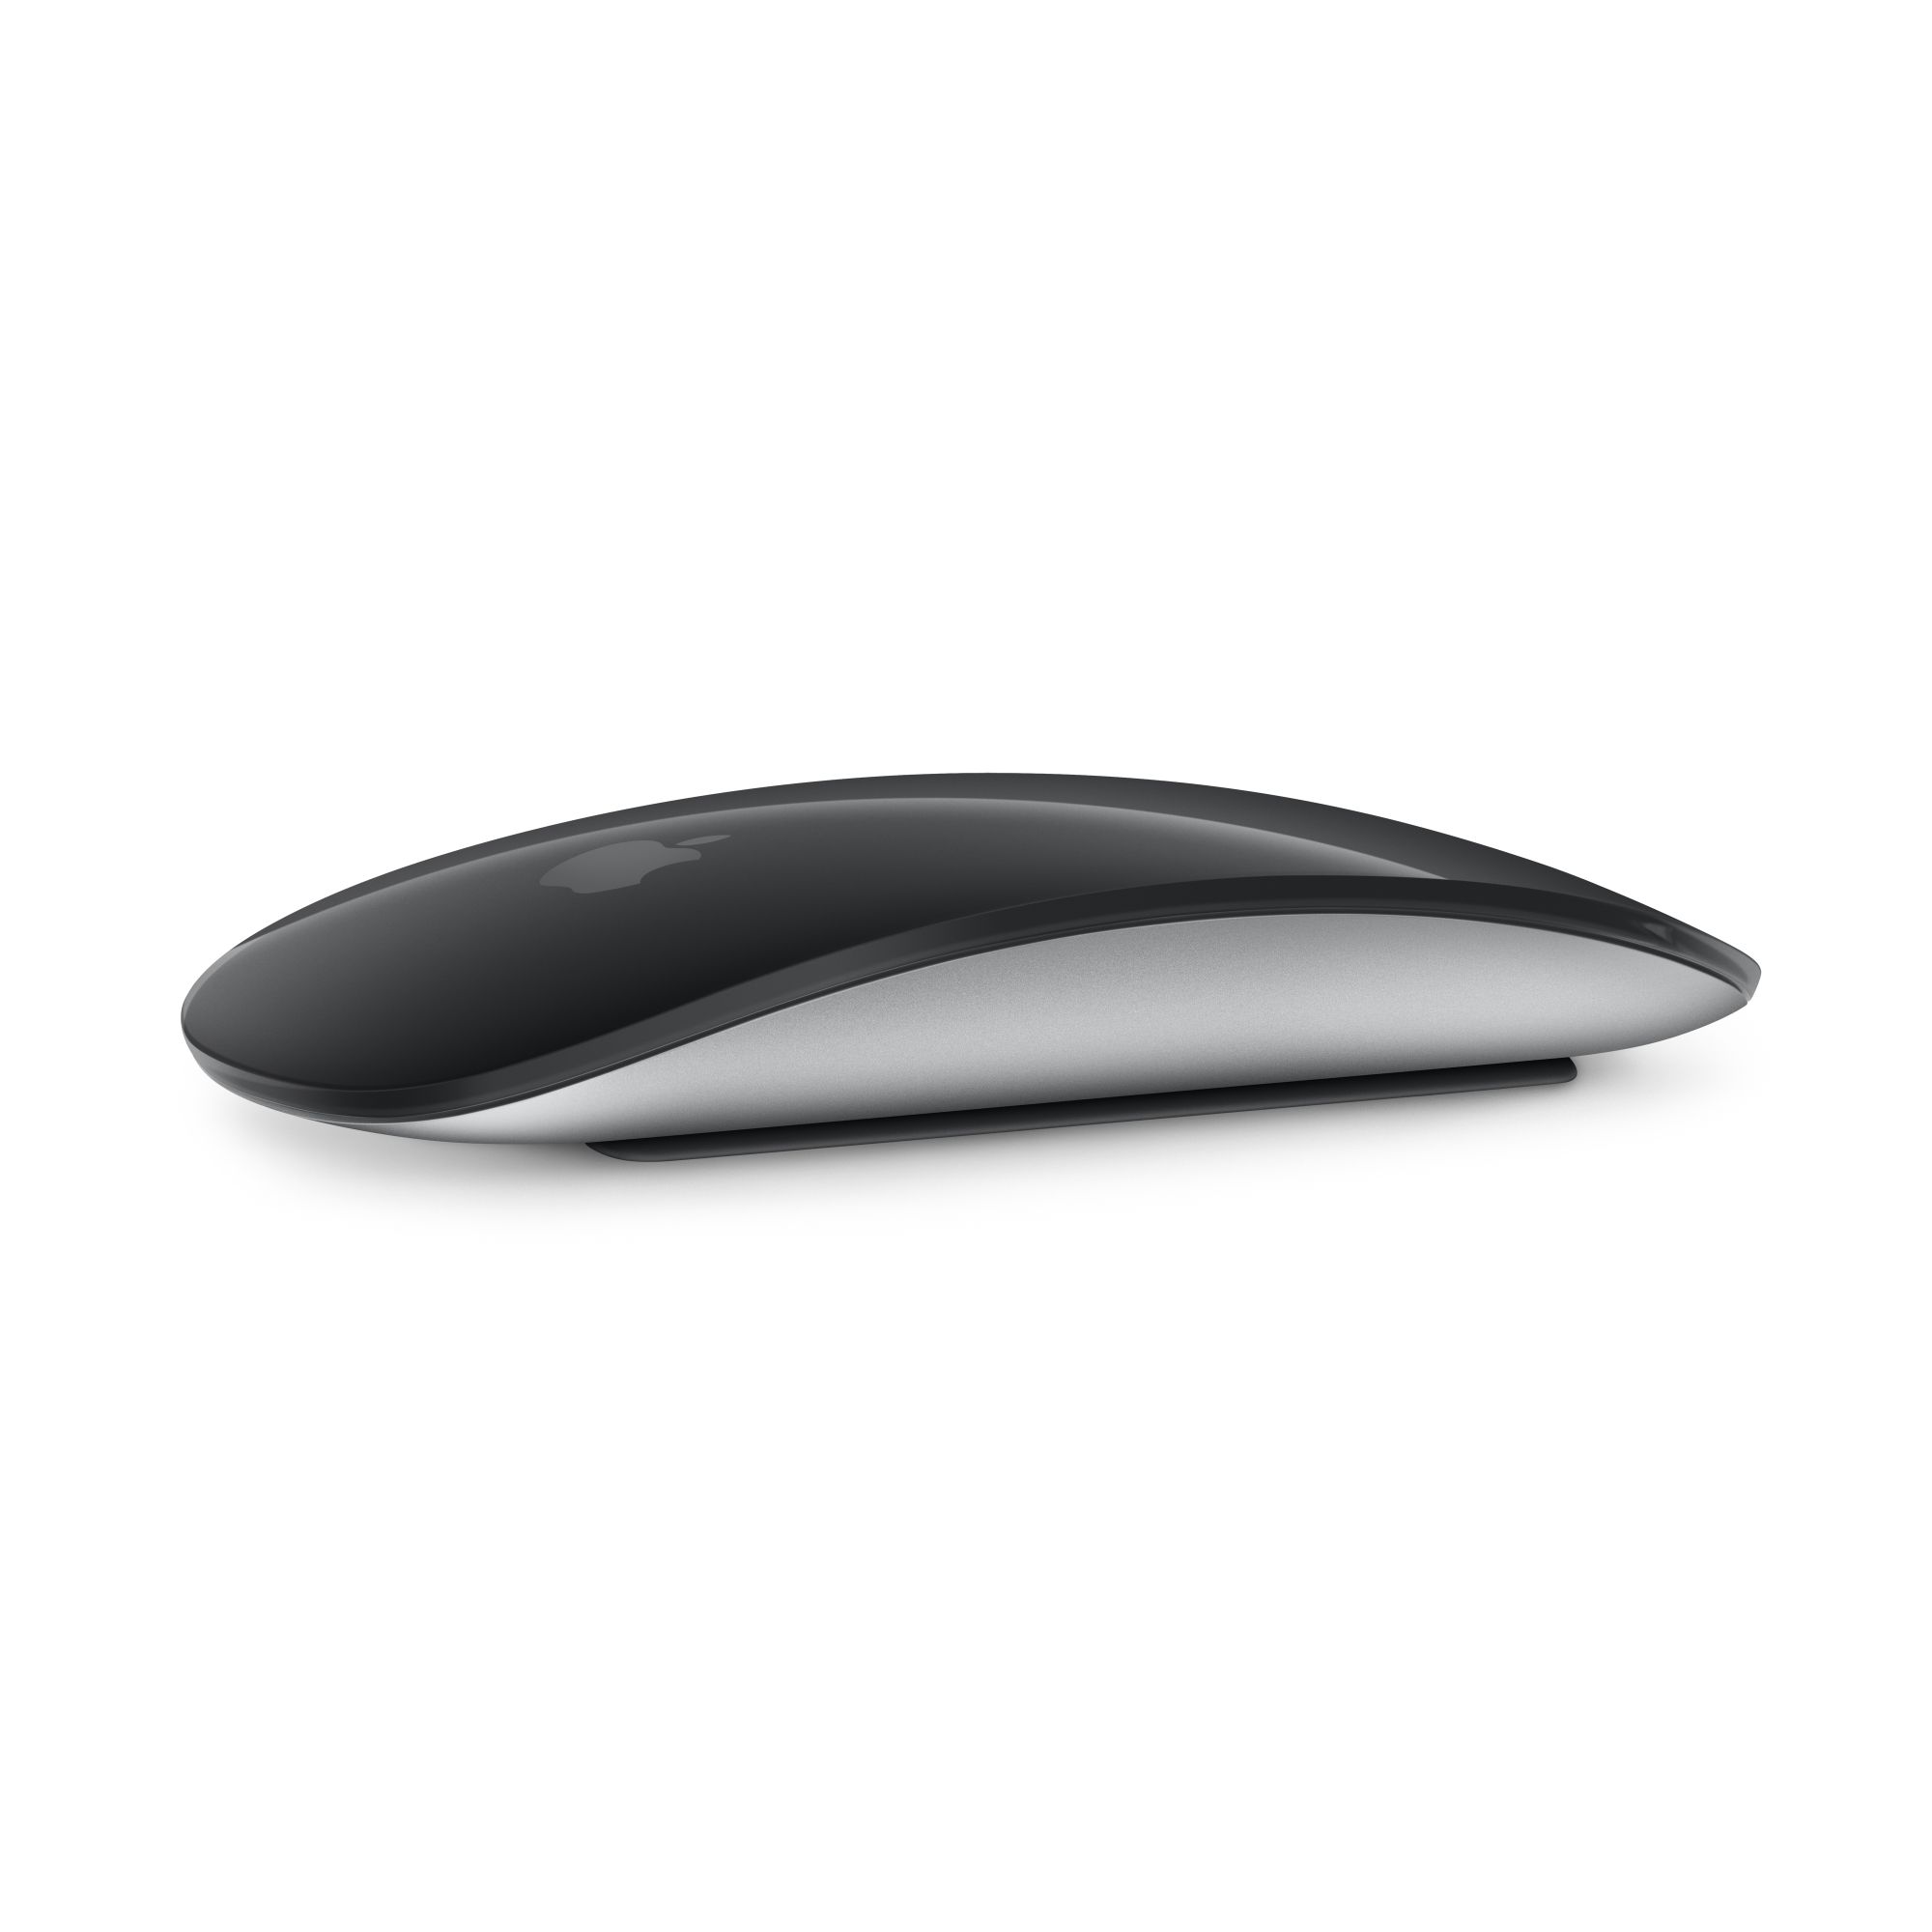 Apple Magic Mouse Black Multi-Touch Surface